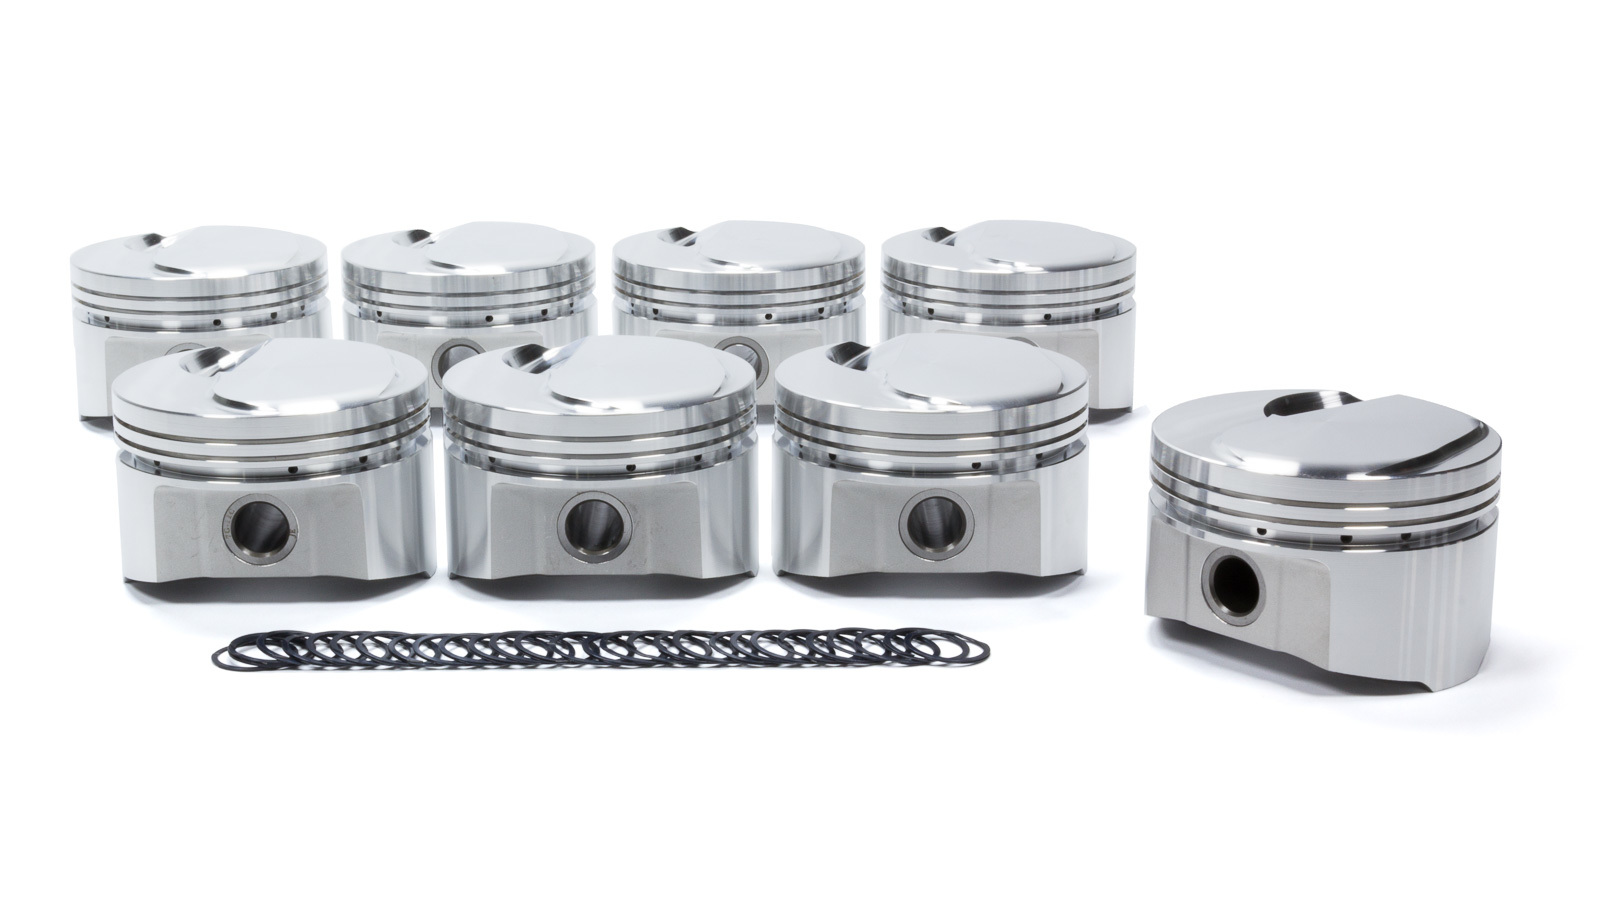 SRP Pistons 306724 Piston, BBC Small Dome Profile, Forged, 4.280 in Bore, 1/16 x 1/16 x 3/16 in Ring Grooves, Plus 10.70 cc, Big Block Chevy, Set of 8